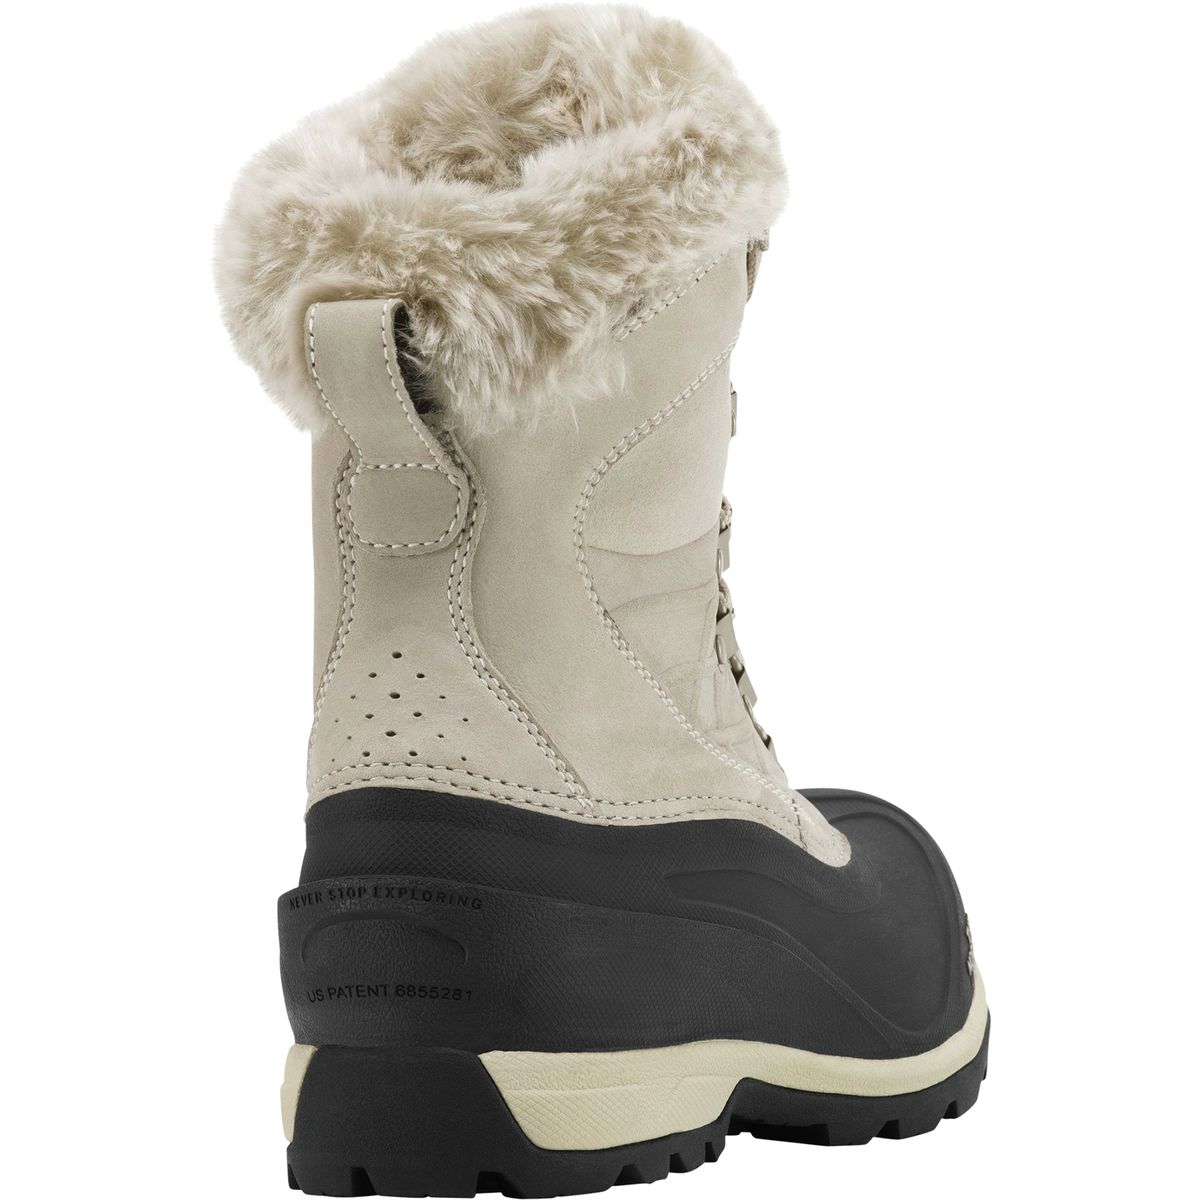 the north face women's chilkat 400 winter boots